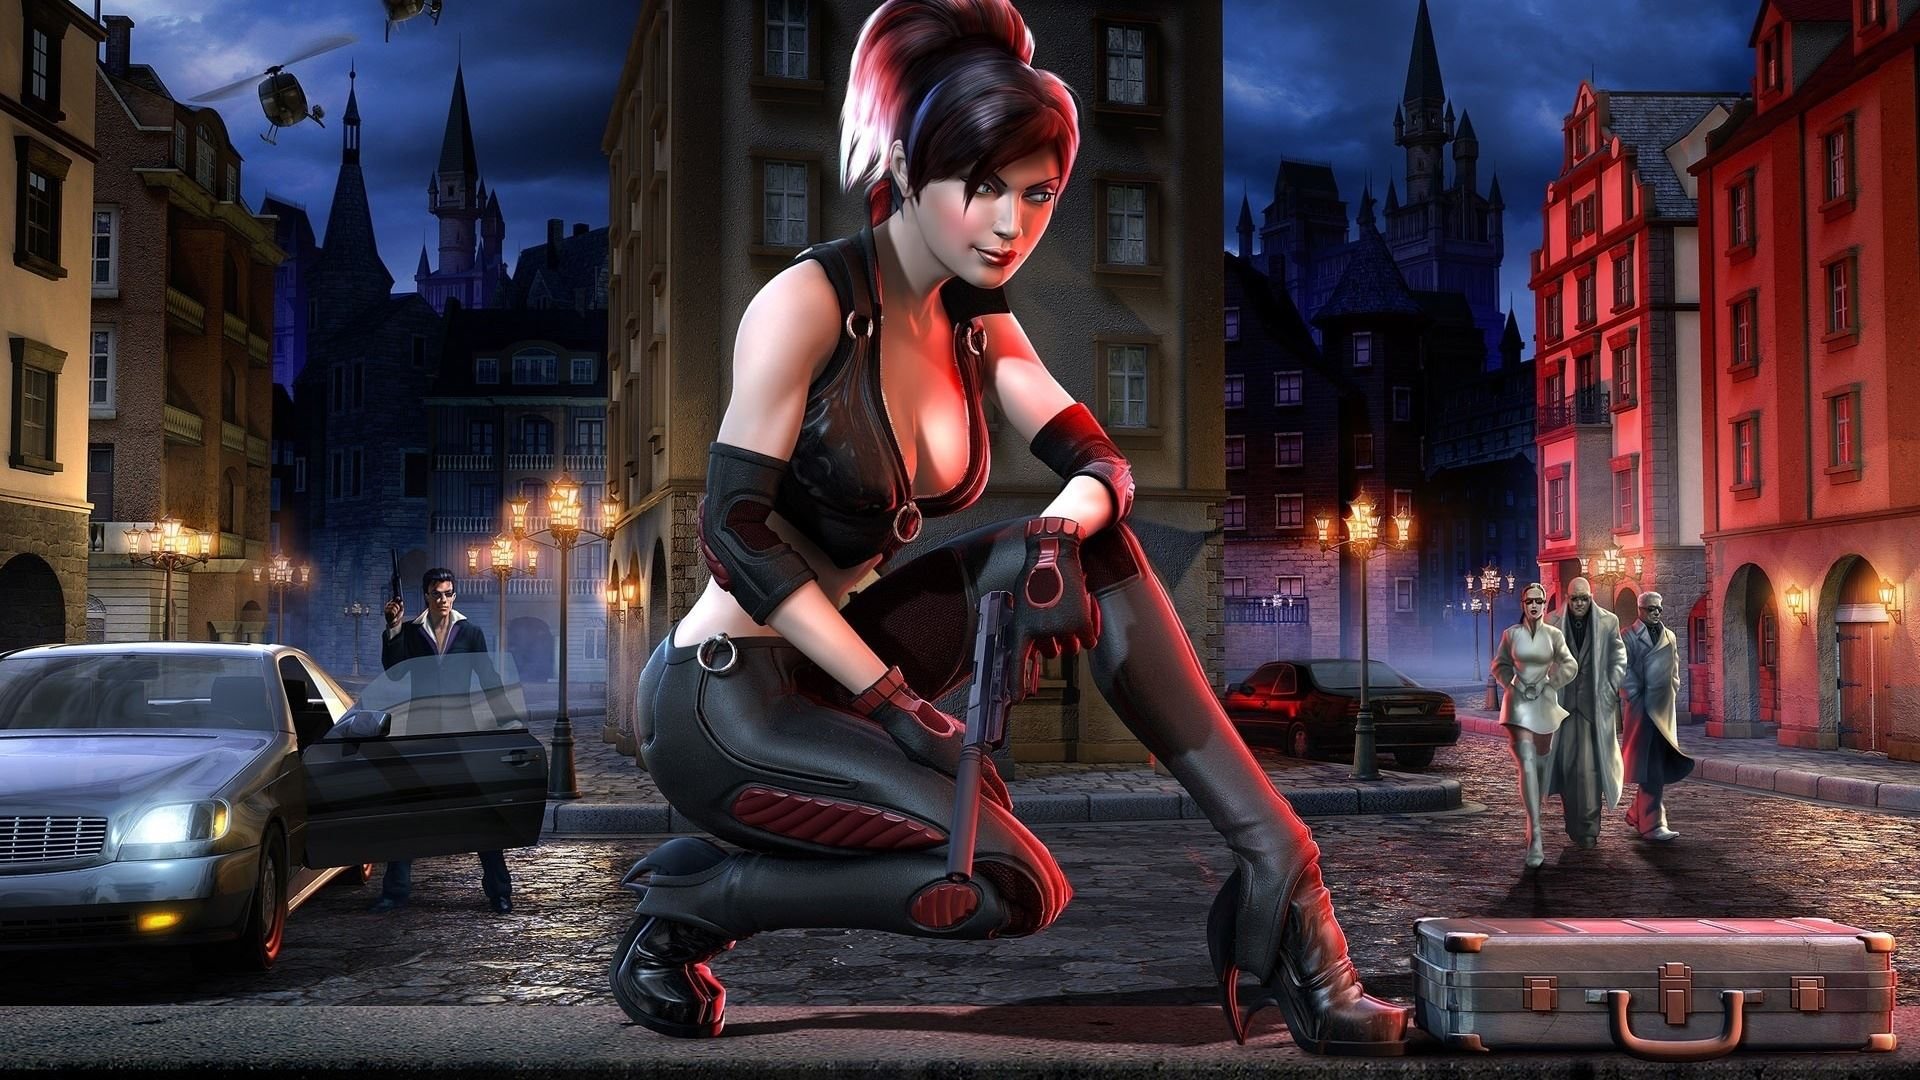 bloodrayne wallpaper,action adventure game,pc game,fictional character,harley quinn,digital compositing